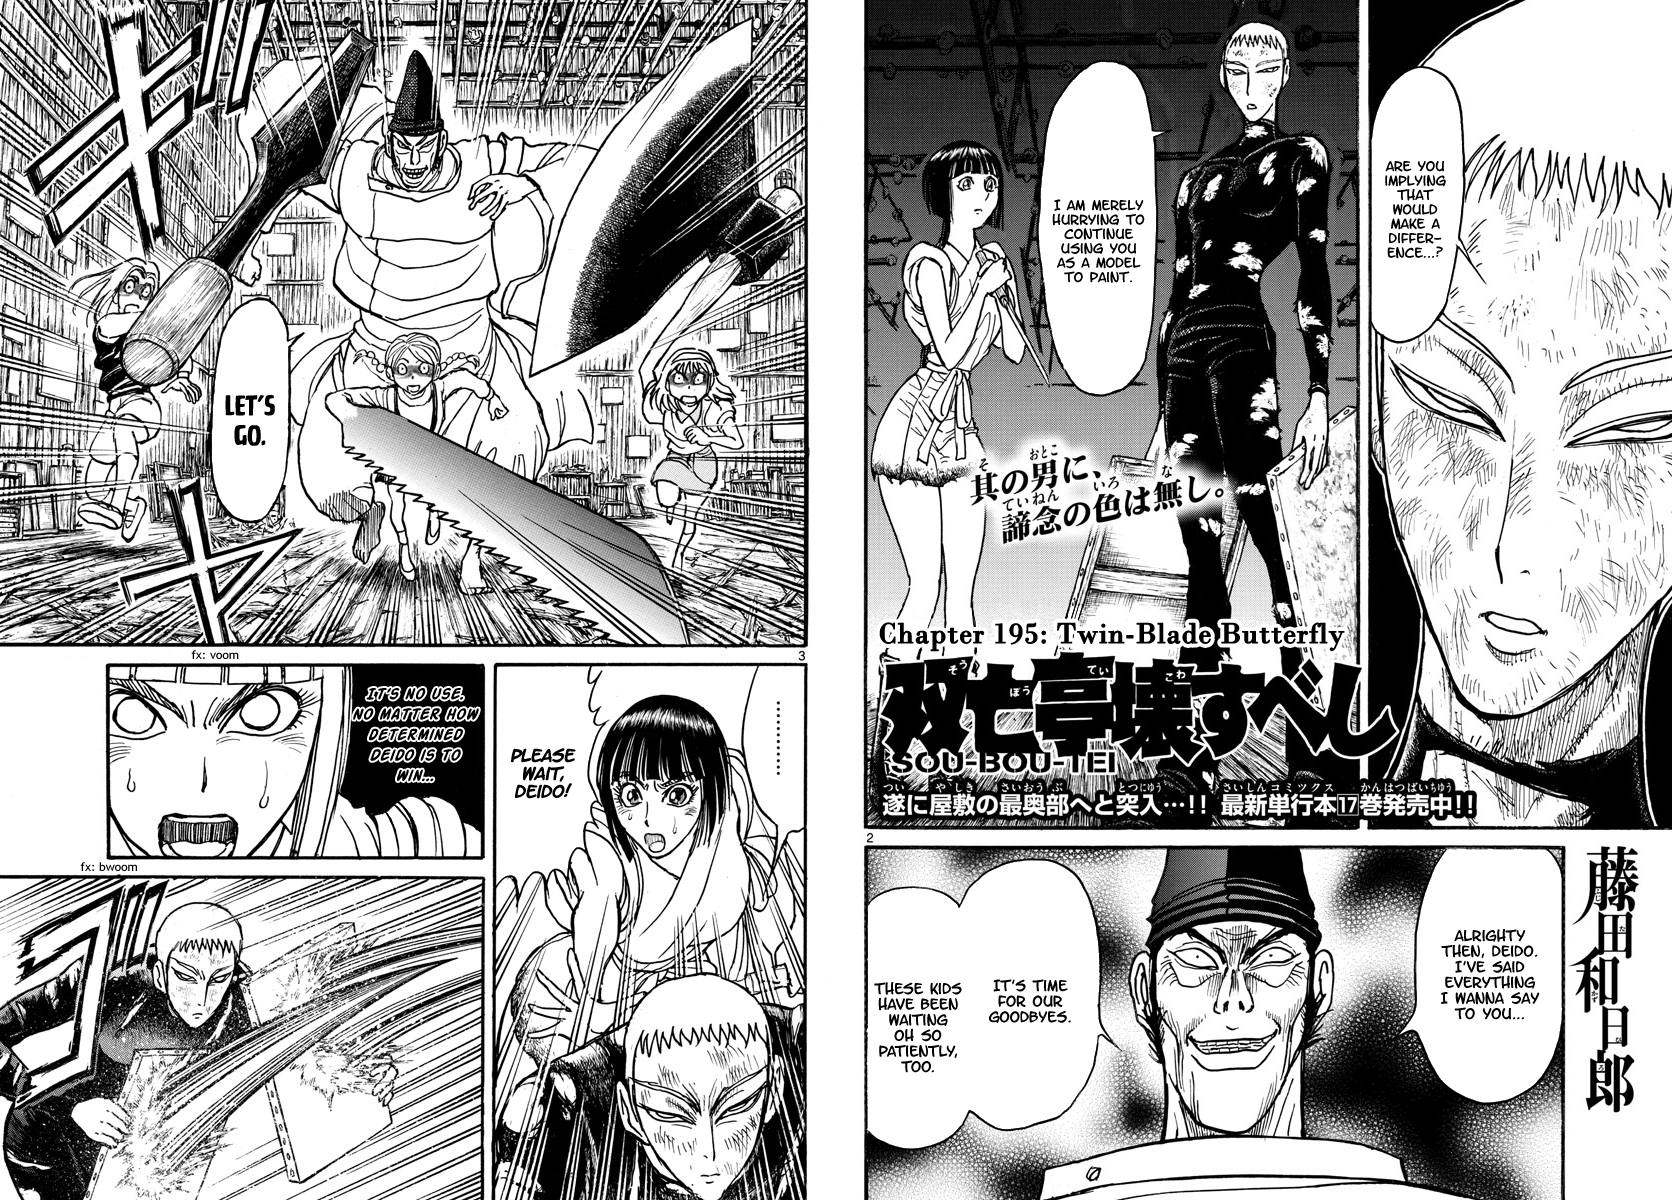 Souboutei Must Be Destroyed Vol.20 Chapter 195: Twin-Blade Butterfly - Picture 2